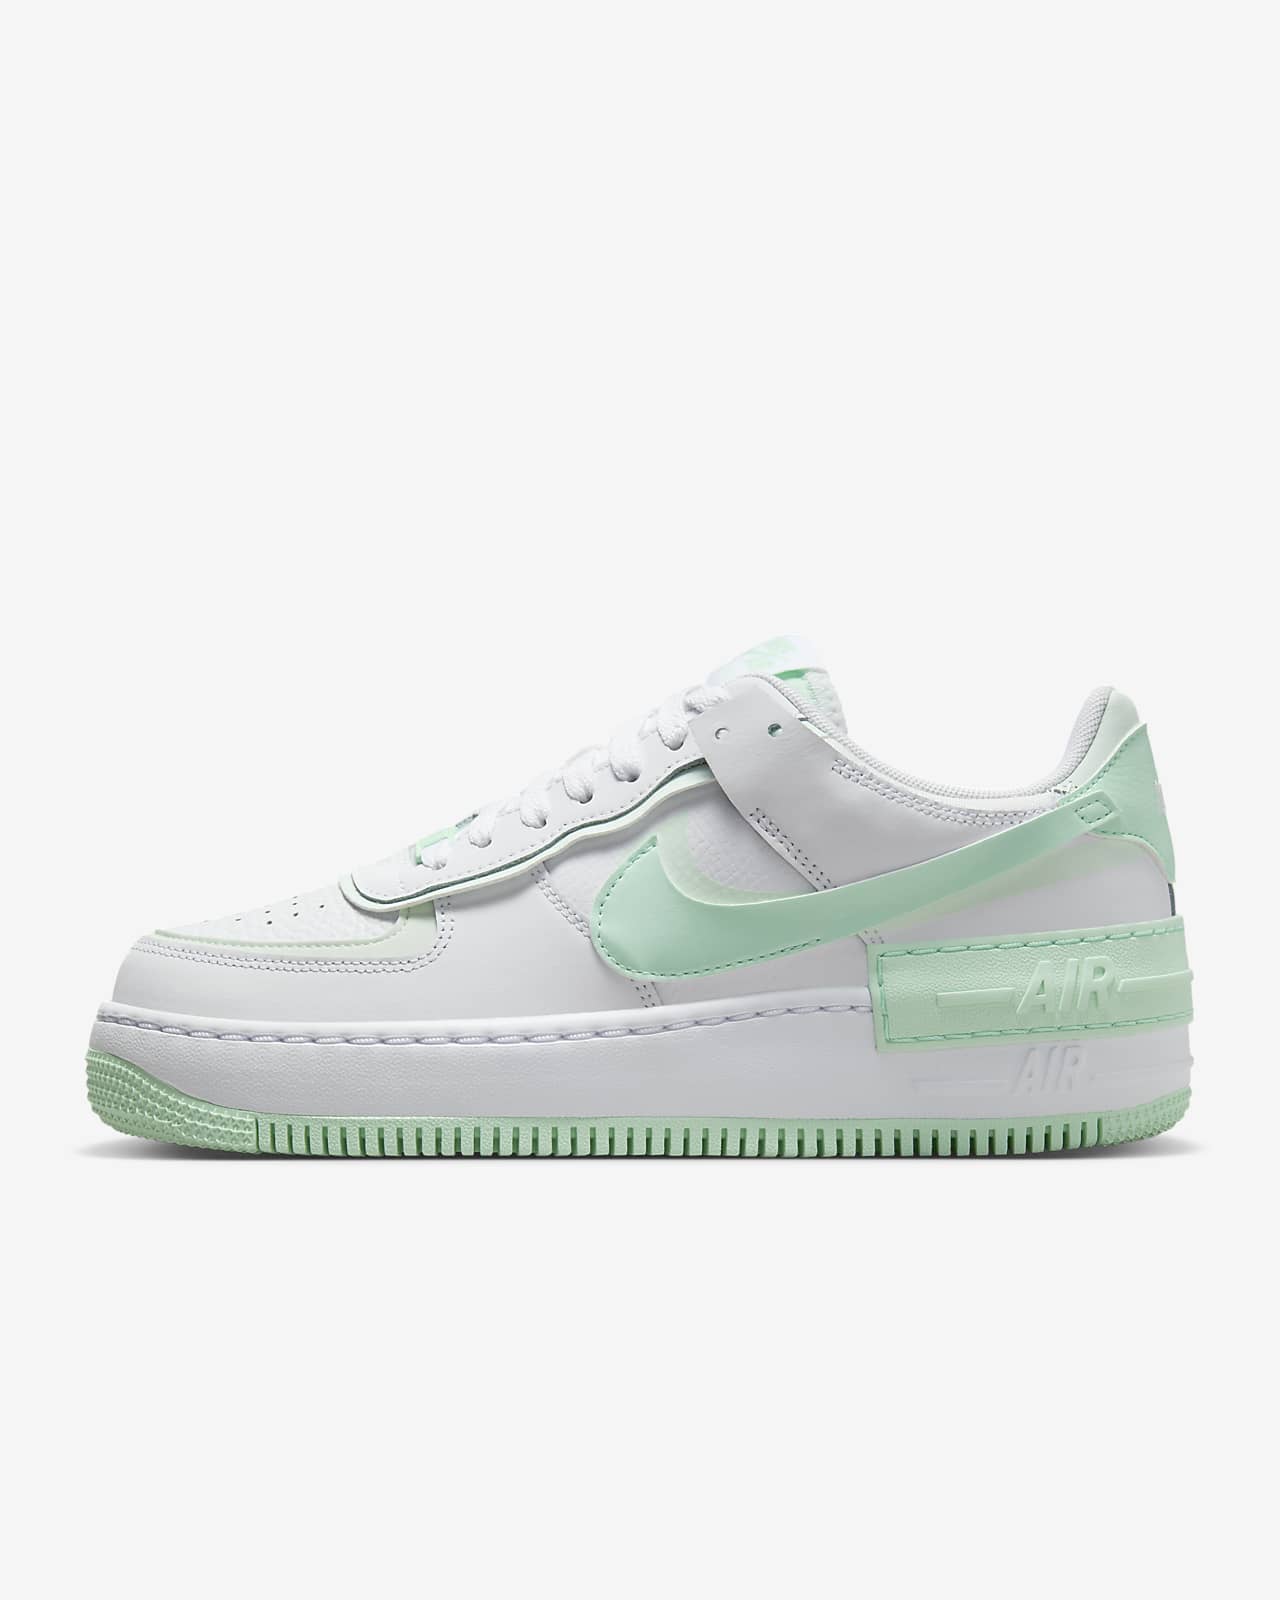 Nike Air Force 1 shadow sneakers size 8 in women - clothing & accessories -  by owner - apparel sale - craigslist